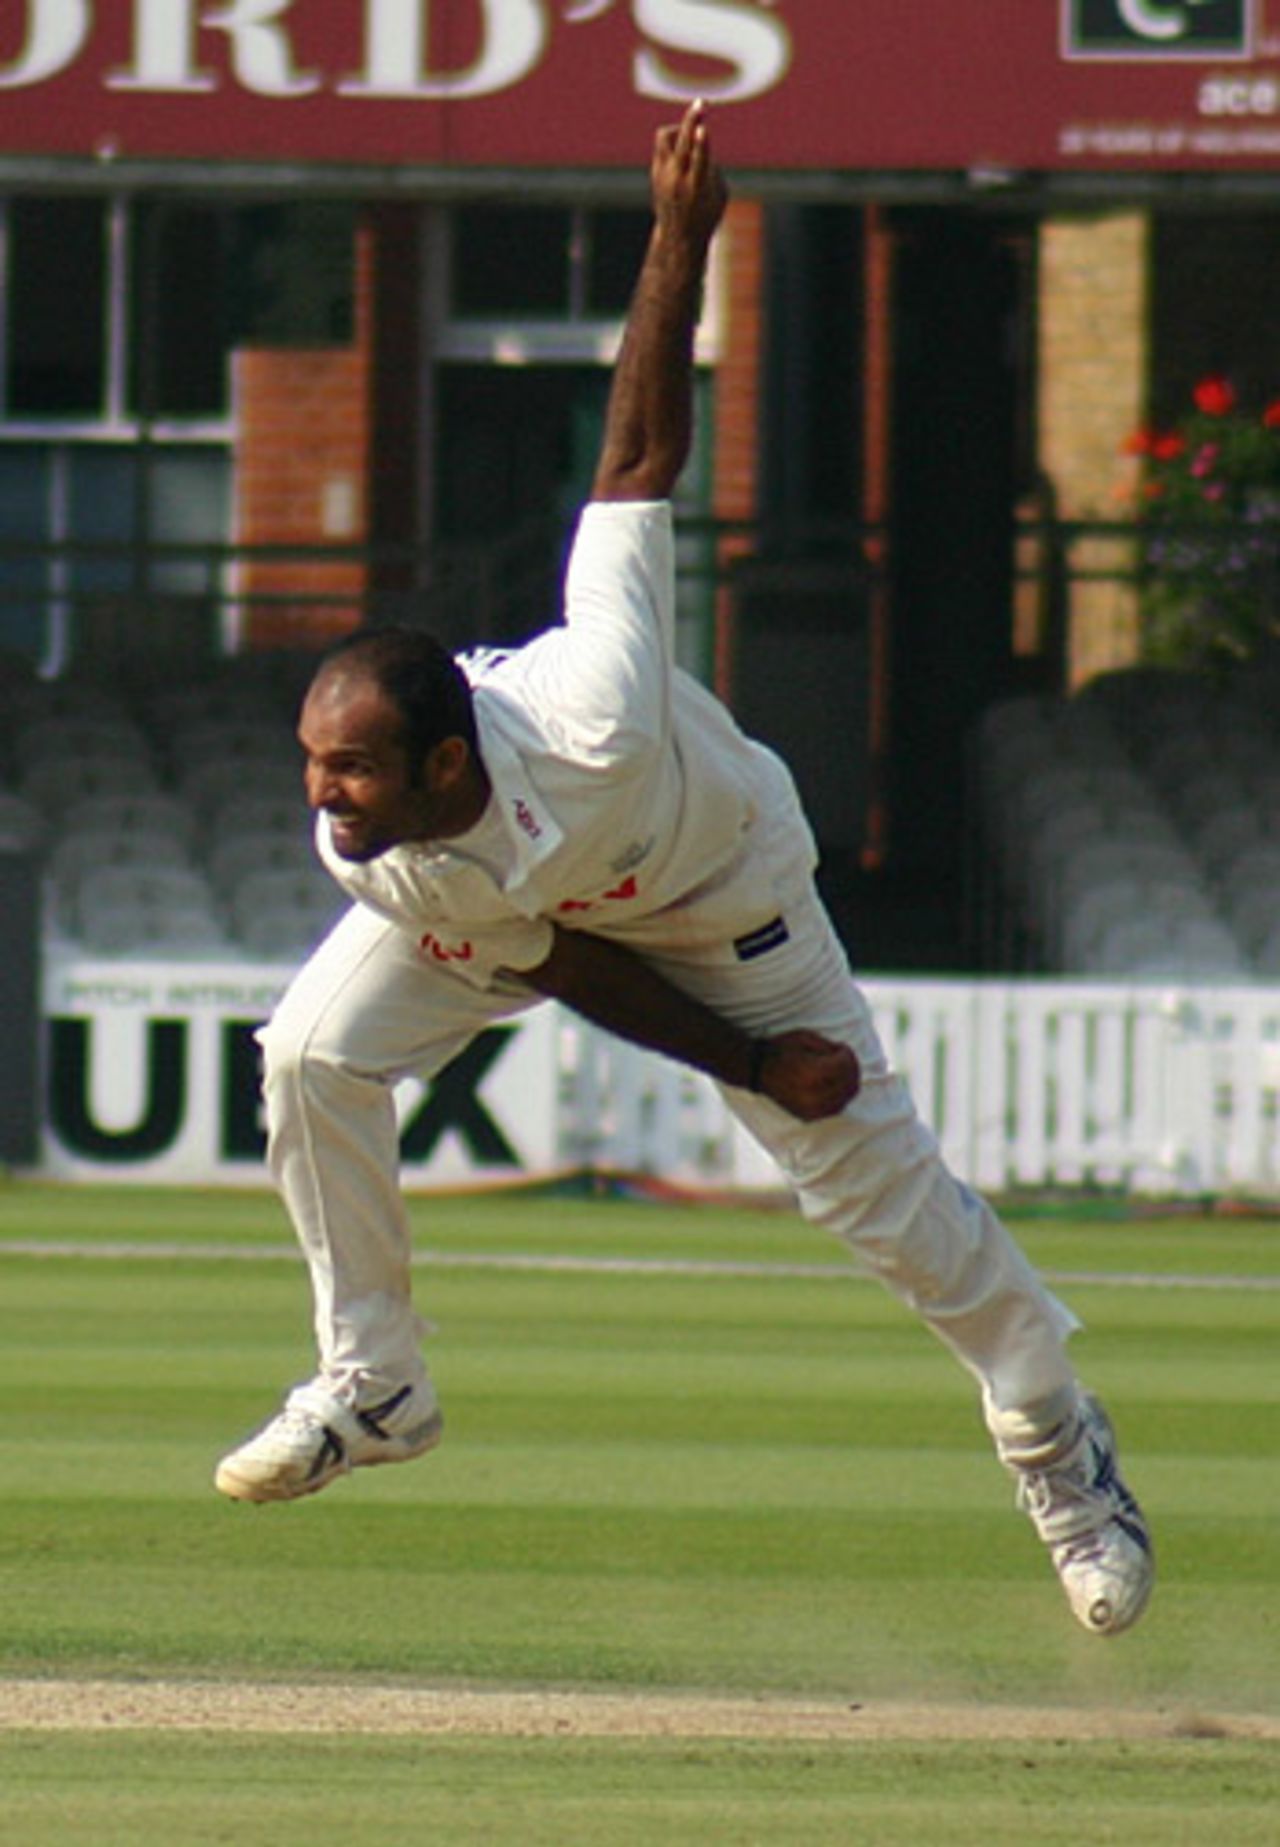 Naved-ul-Hasan in full flow, Middlesex v Sussex, Lord's, August 17, 2005